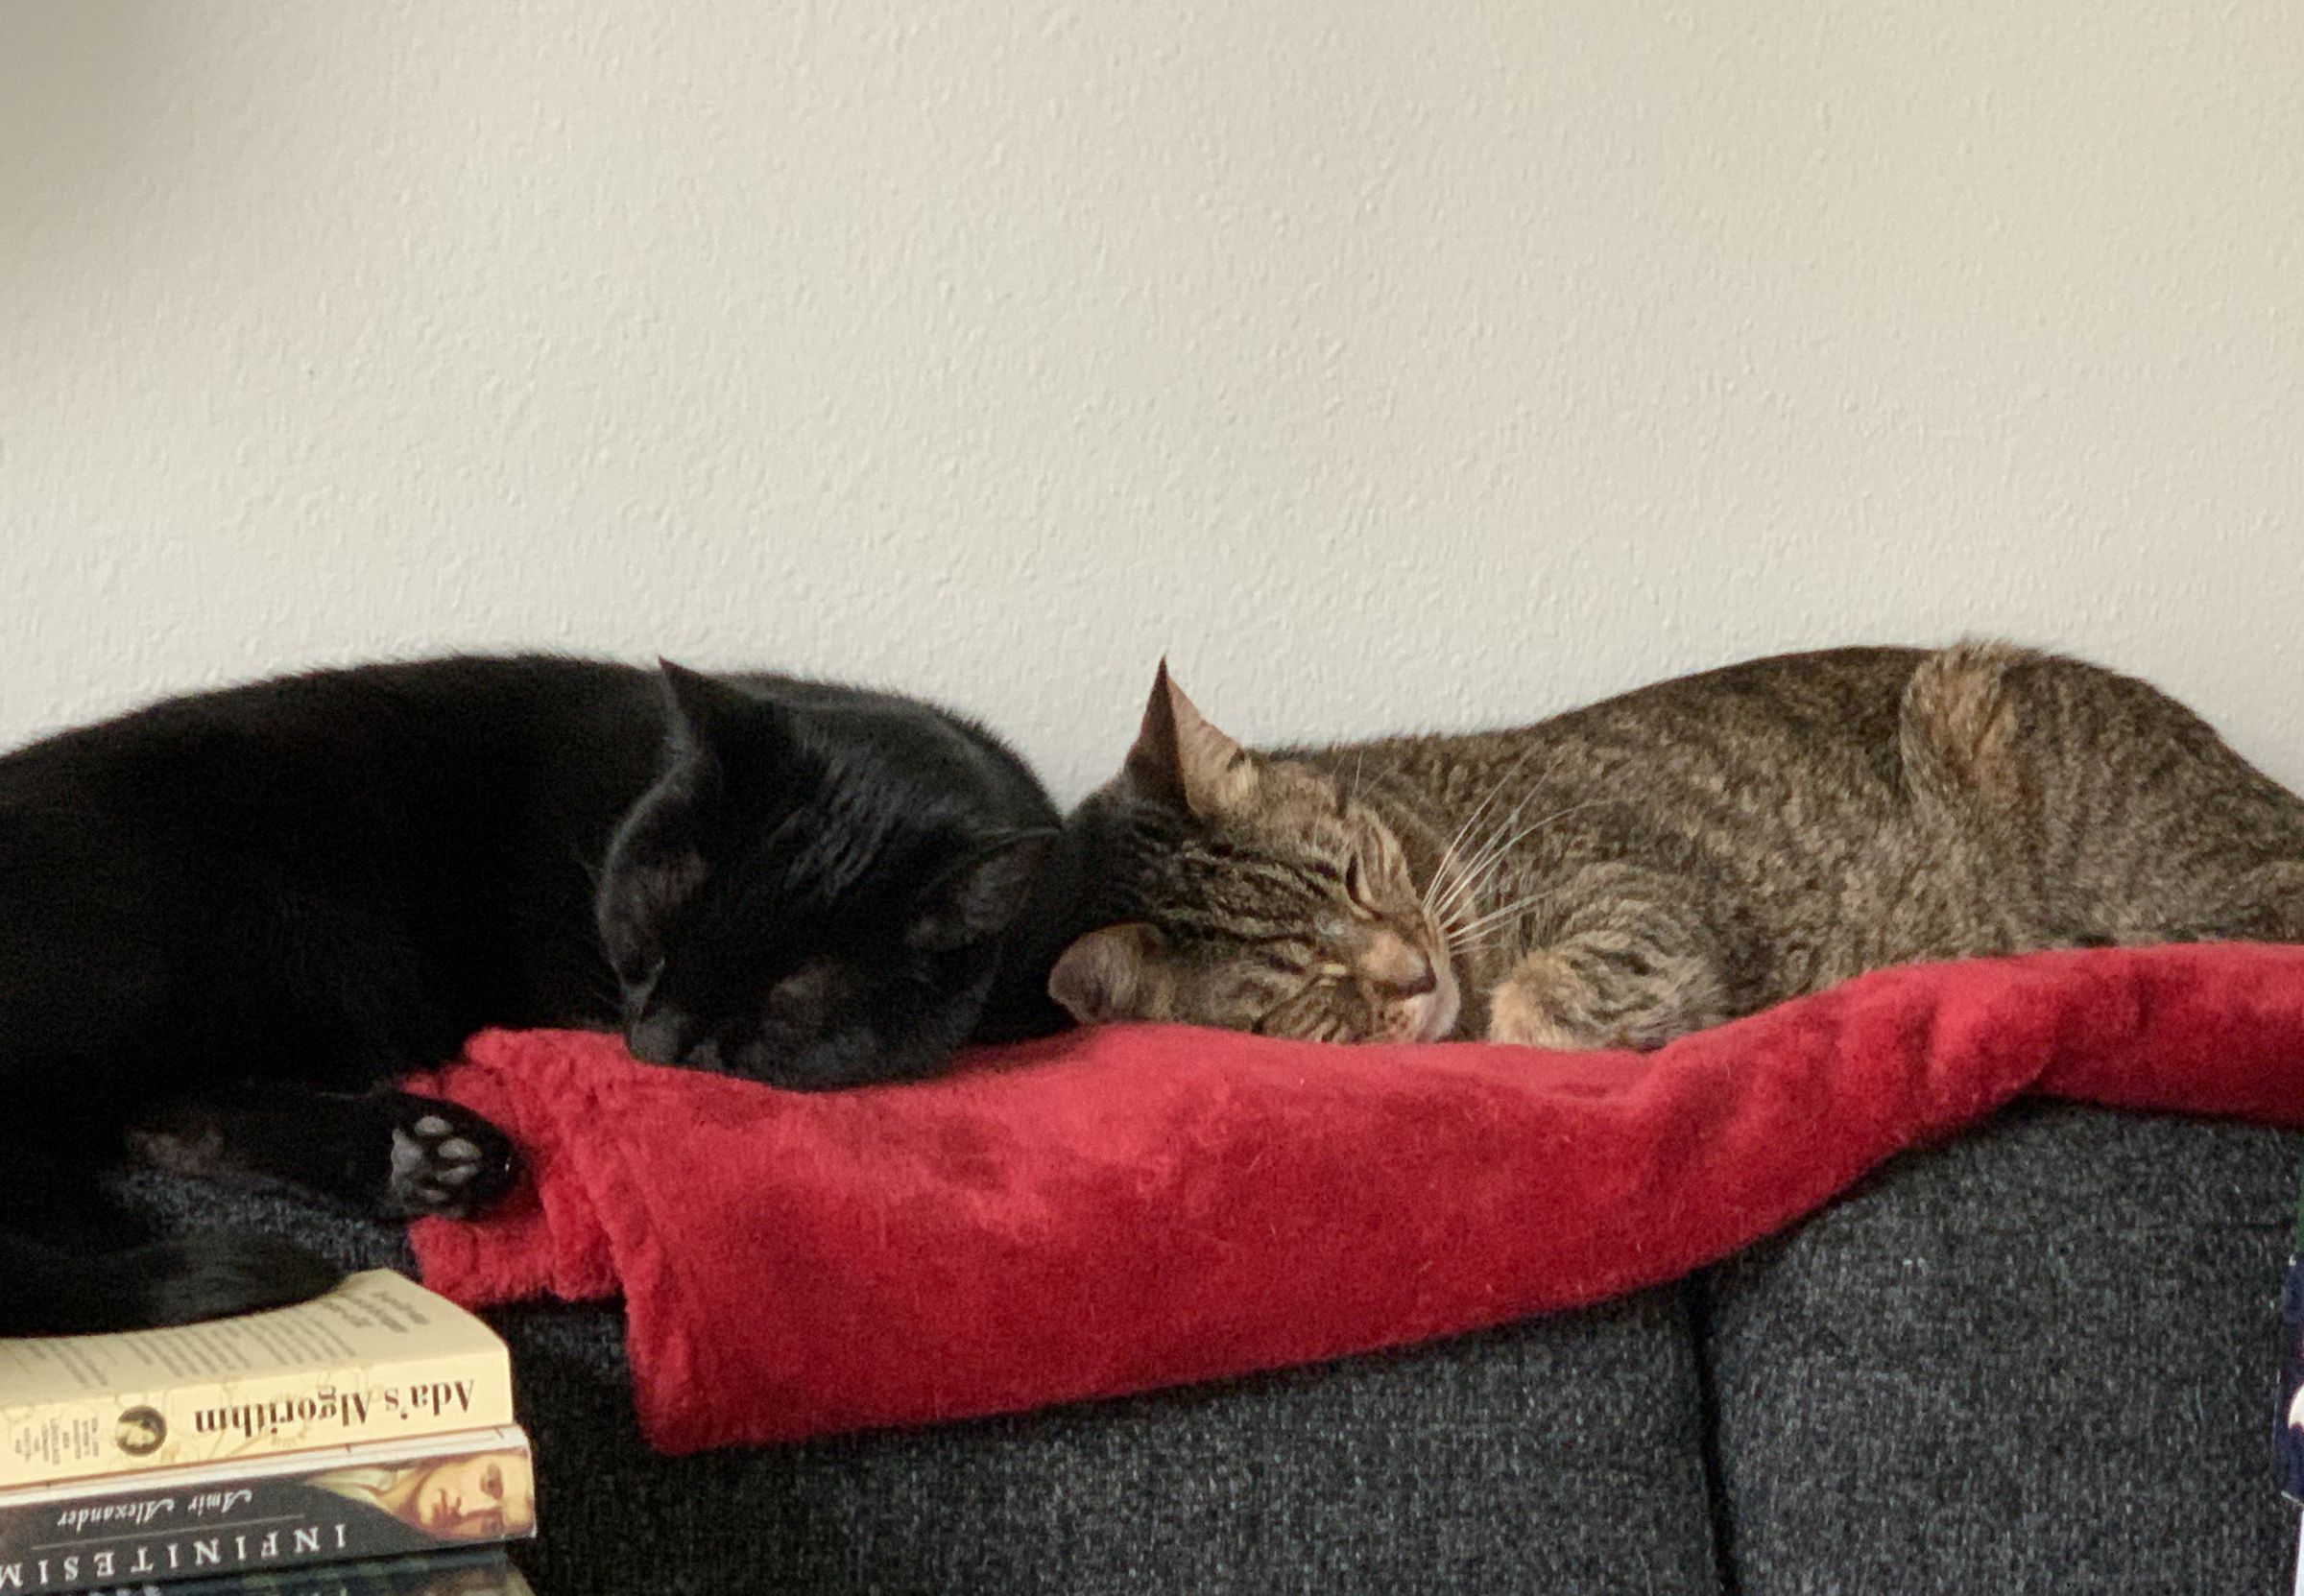 A black cat and a brown cat asleep head-to-head on a red towel.